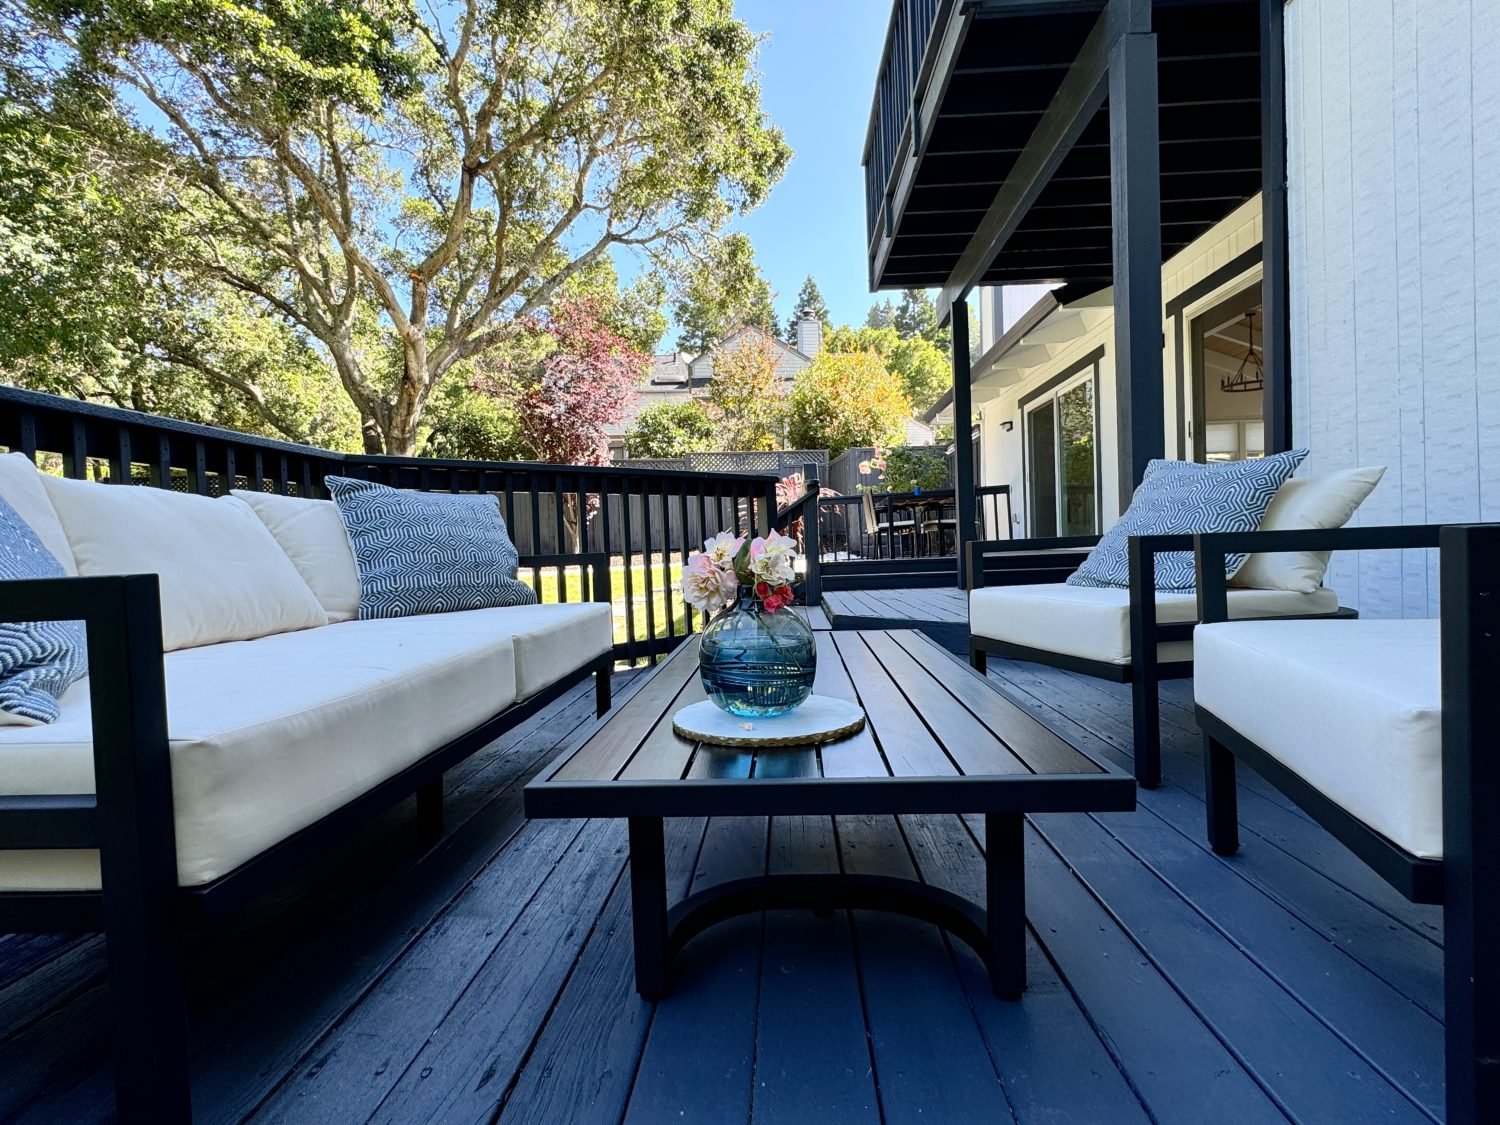 Outdoor patio with dark wooden decking, featuring white cushioned seating and a central coffee table with a vase of flowers. In the background, there are trees and a modern house exterior.